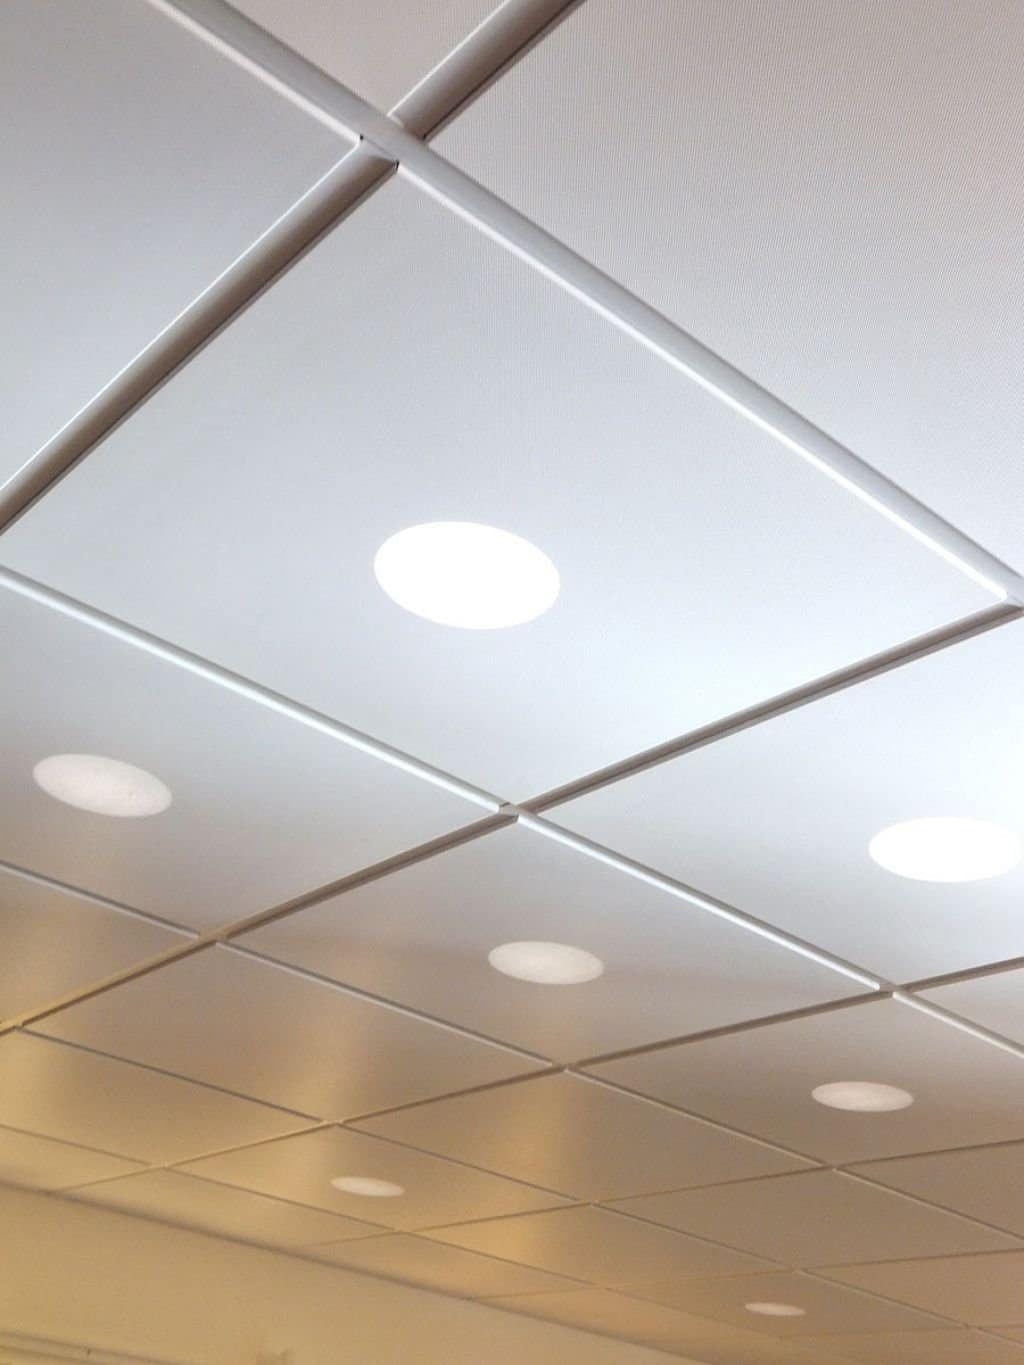 Ceiling Tiles Can Lights